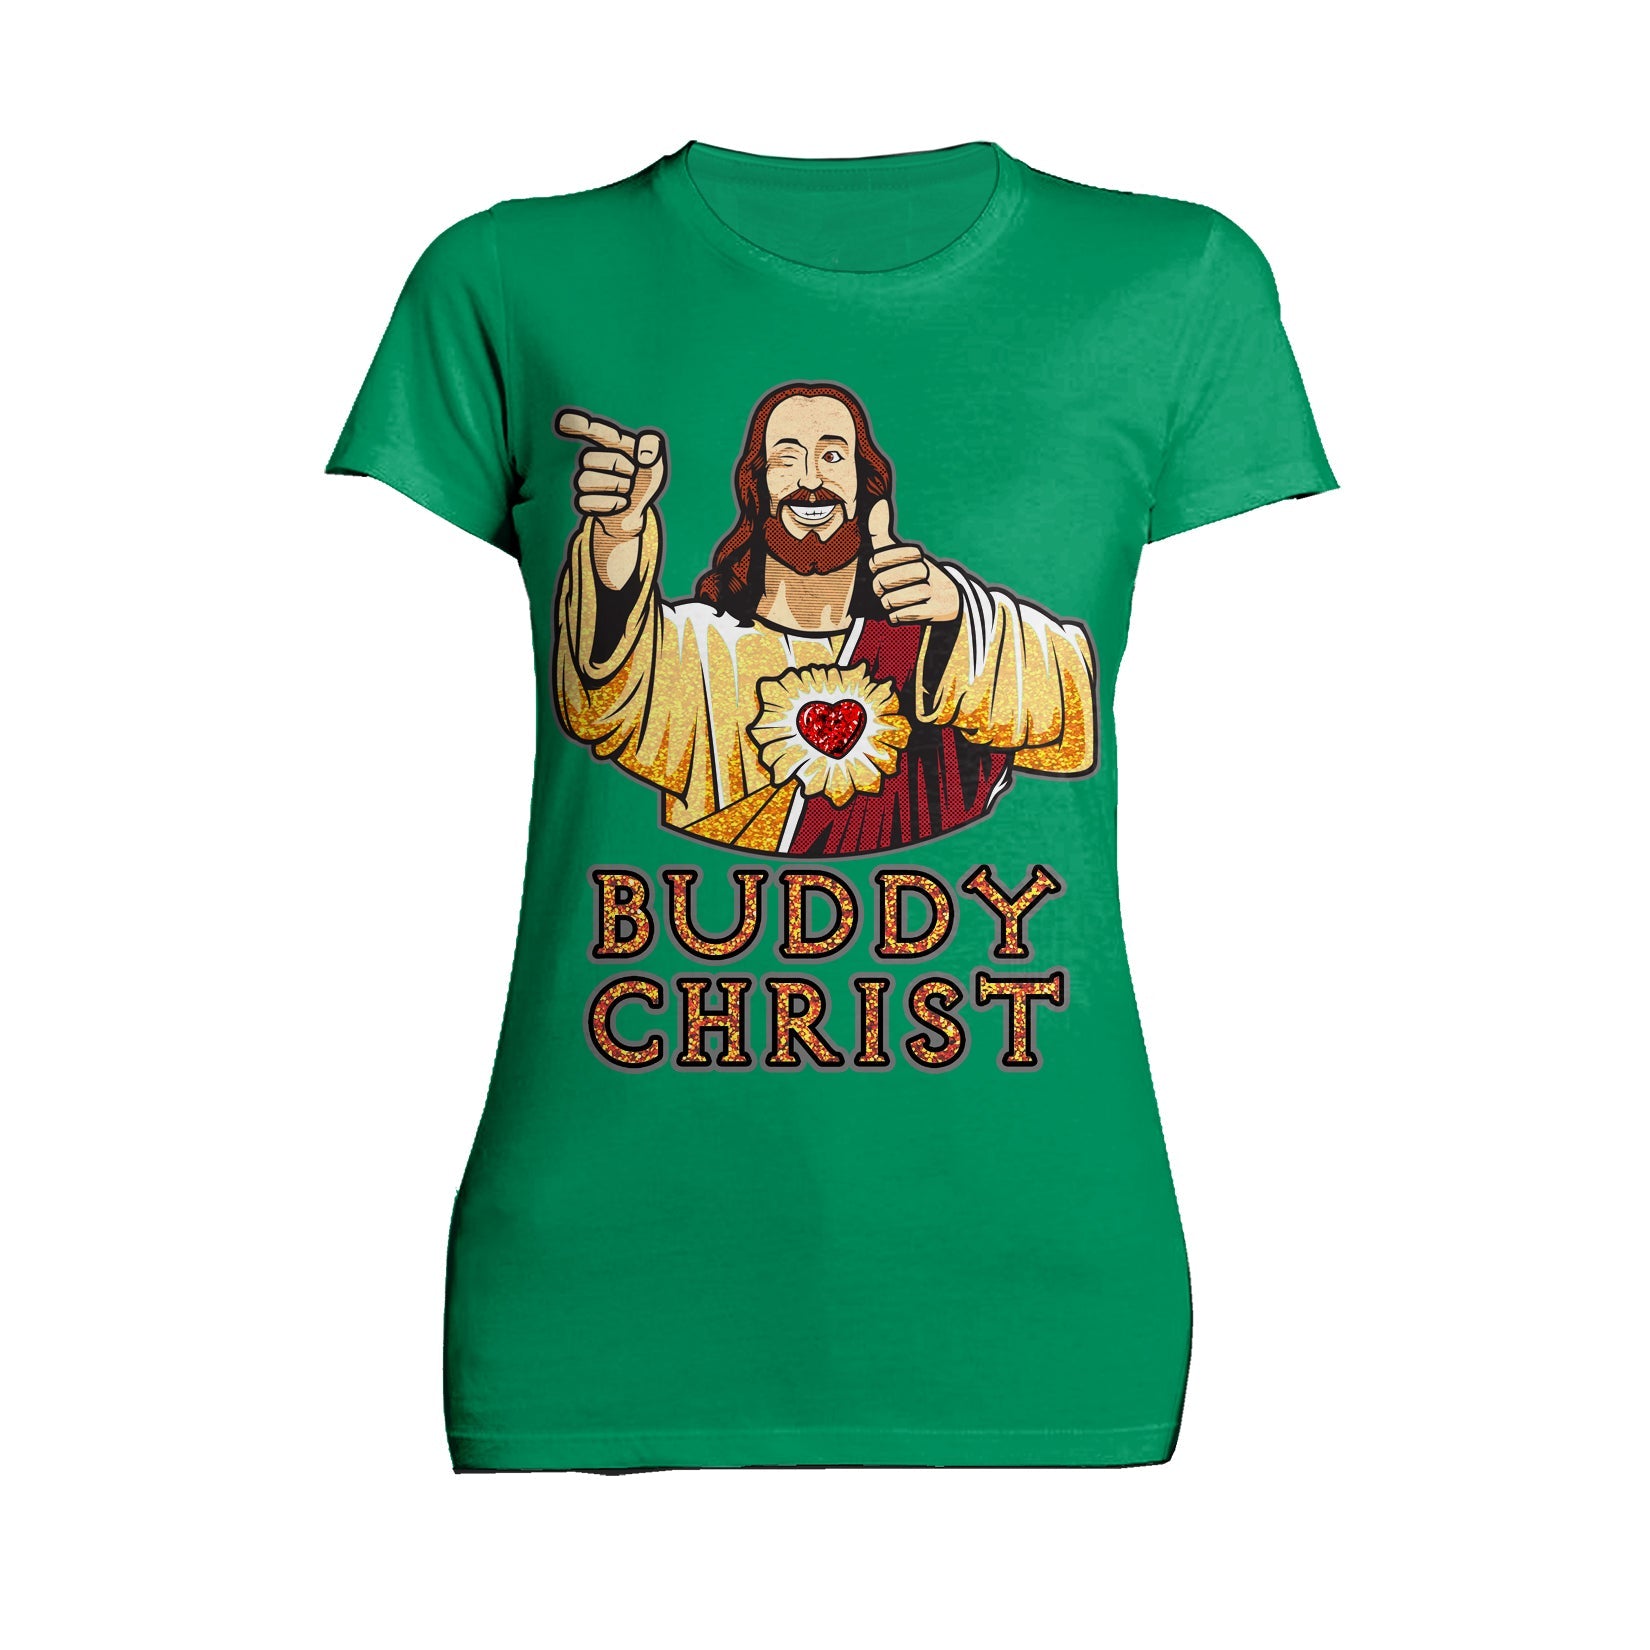 Kevin Smith View Askewniverse Buddy Christ Got Golden Wow Edition Official Women's T-Shirt